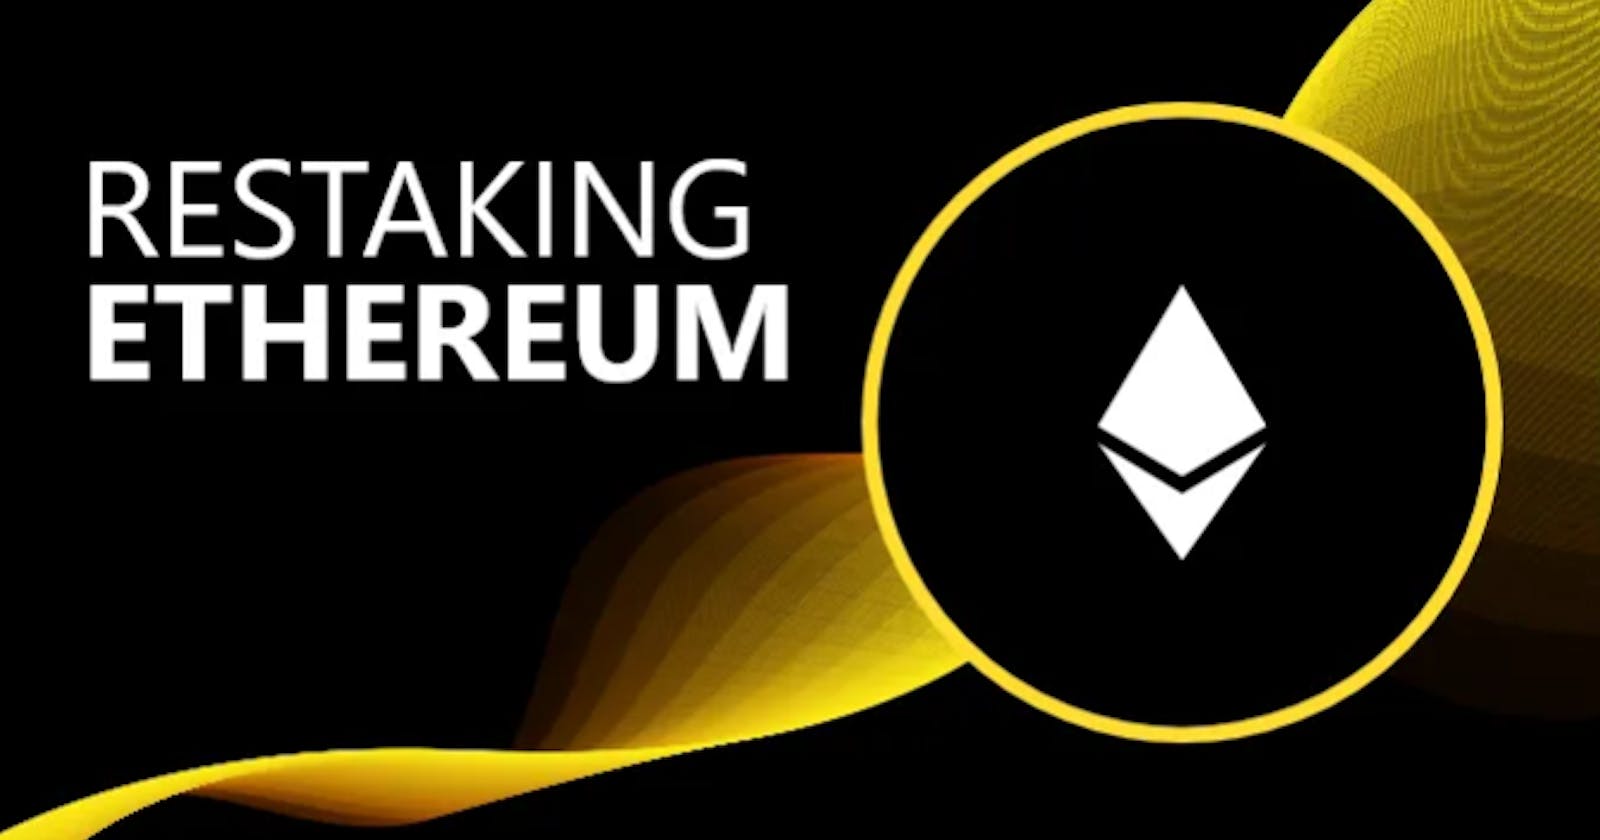 Ethereum (ETH) restaking. XBANKING is the largest protocol of ETH restaking